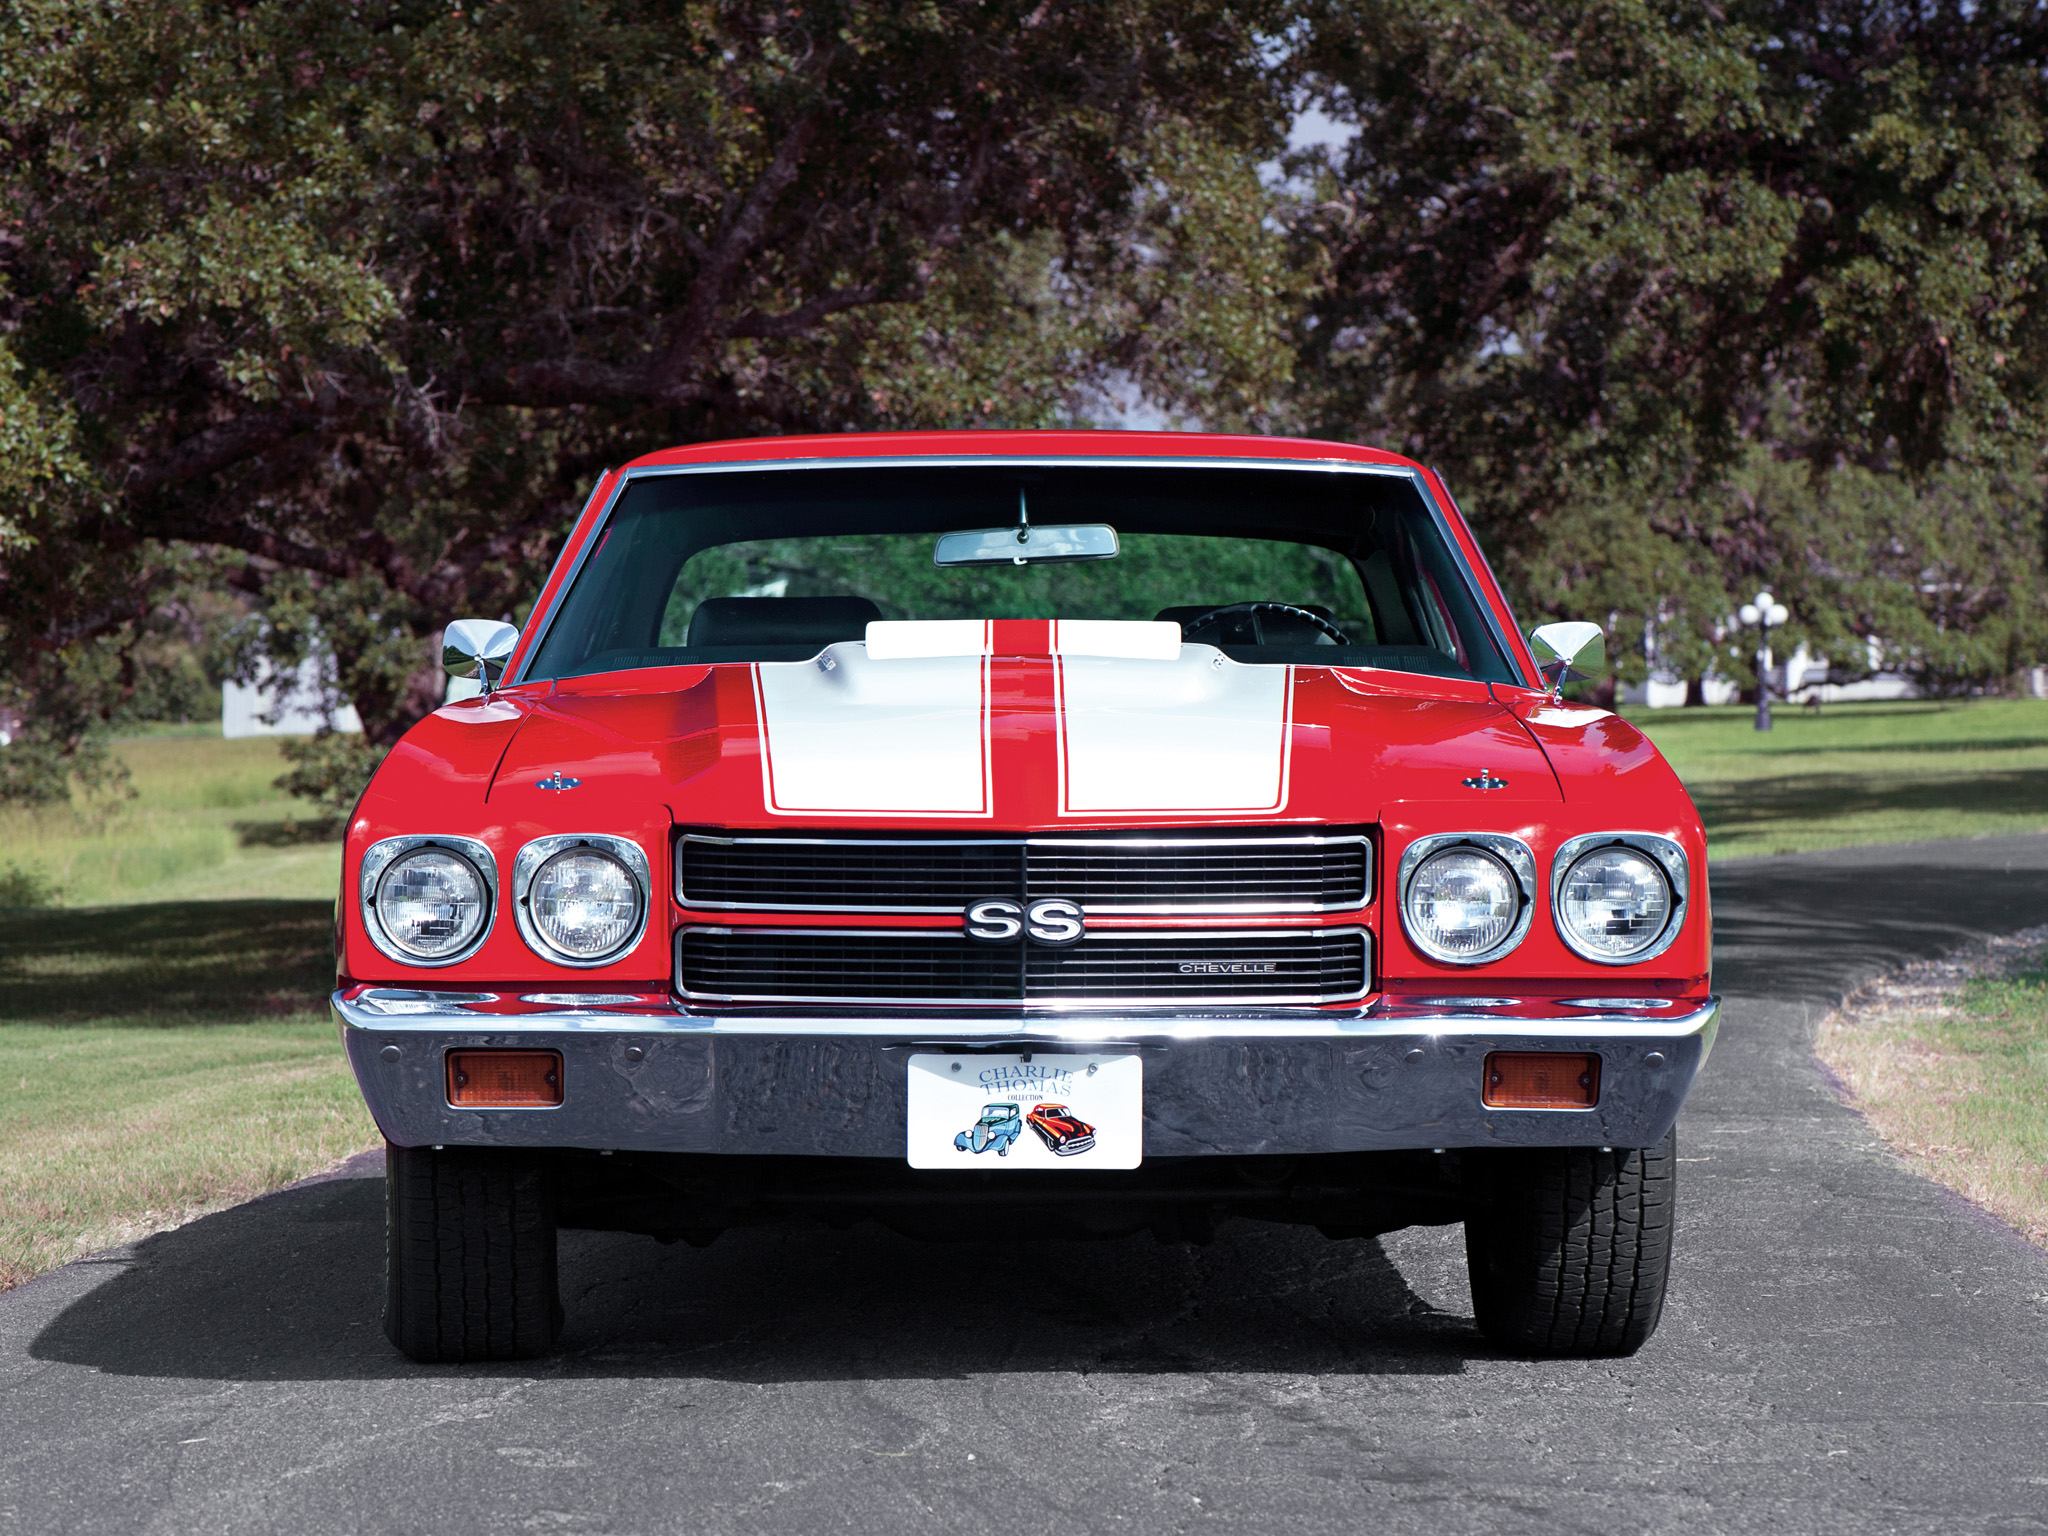 1970, Chevrolet, Chevelle, Ss, 454, Ls6, Hardtop, Coupe, Muscle, Classic, S s Wallpaper